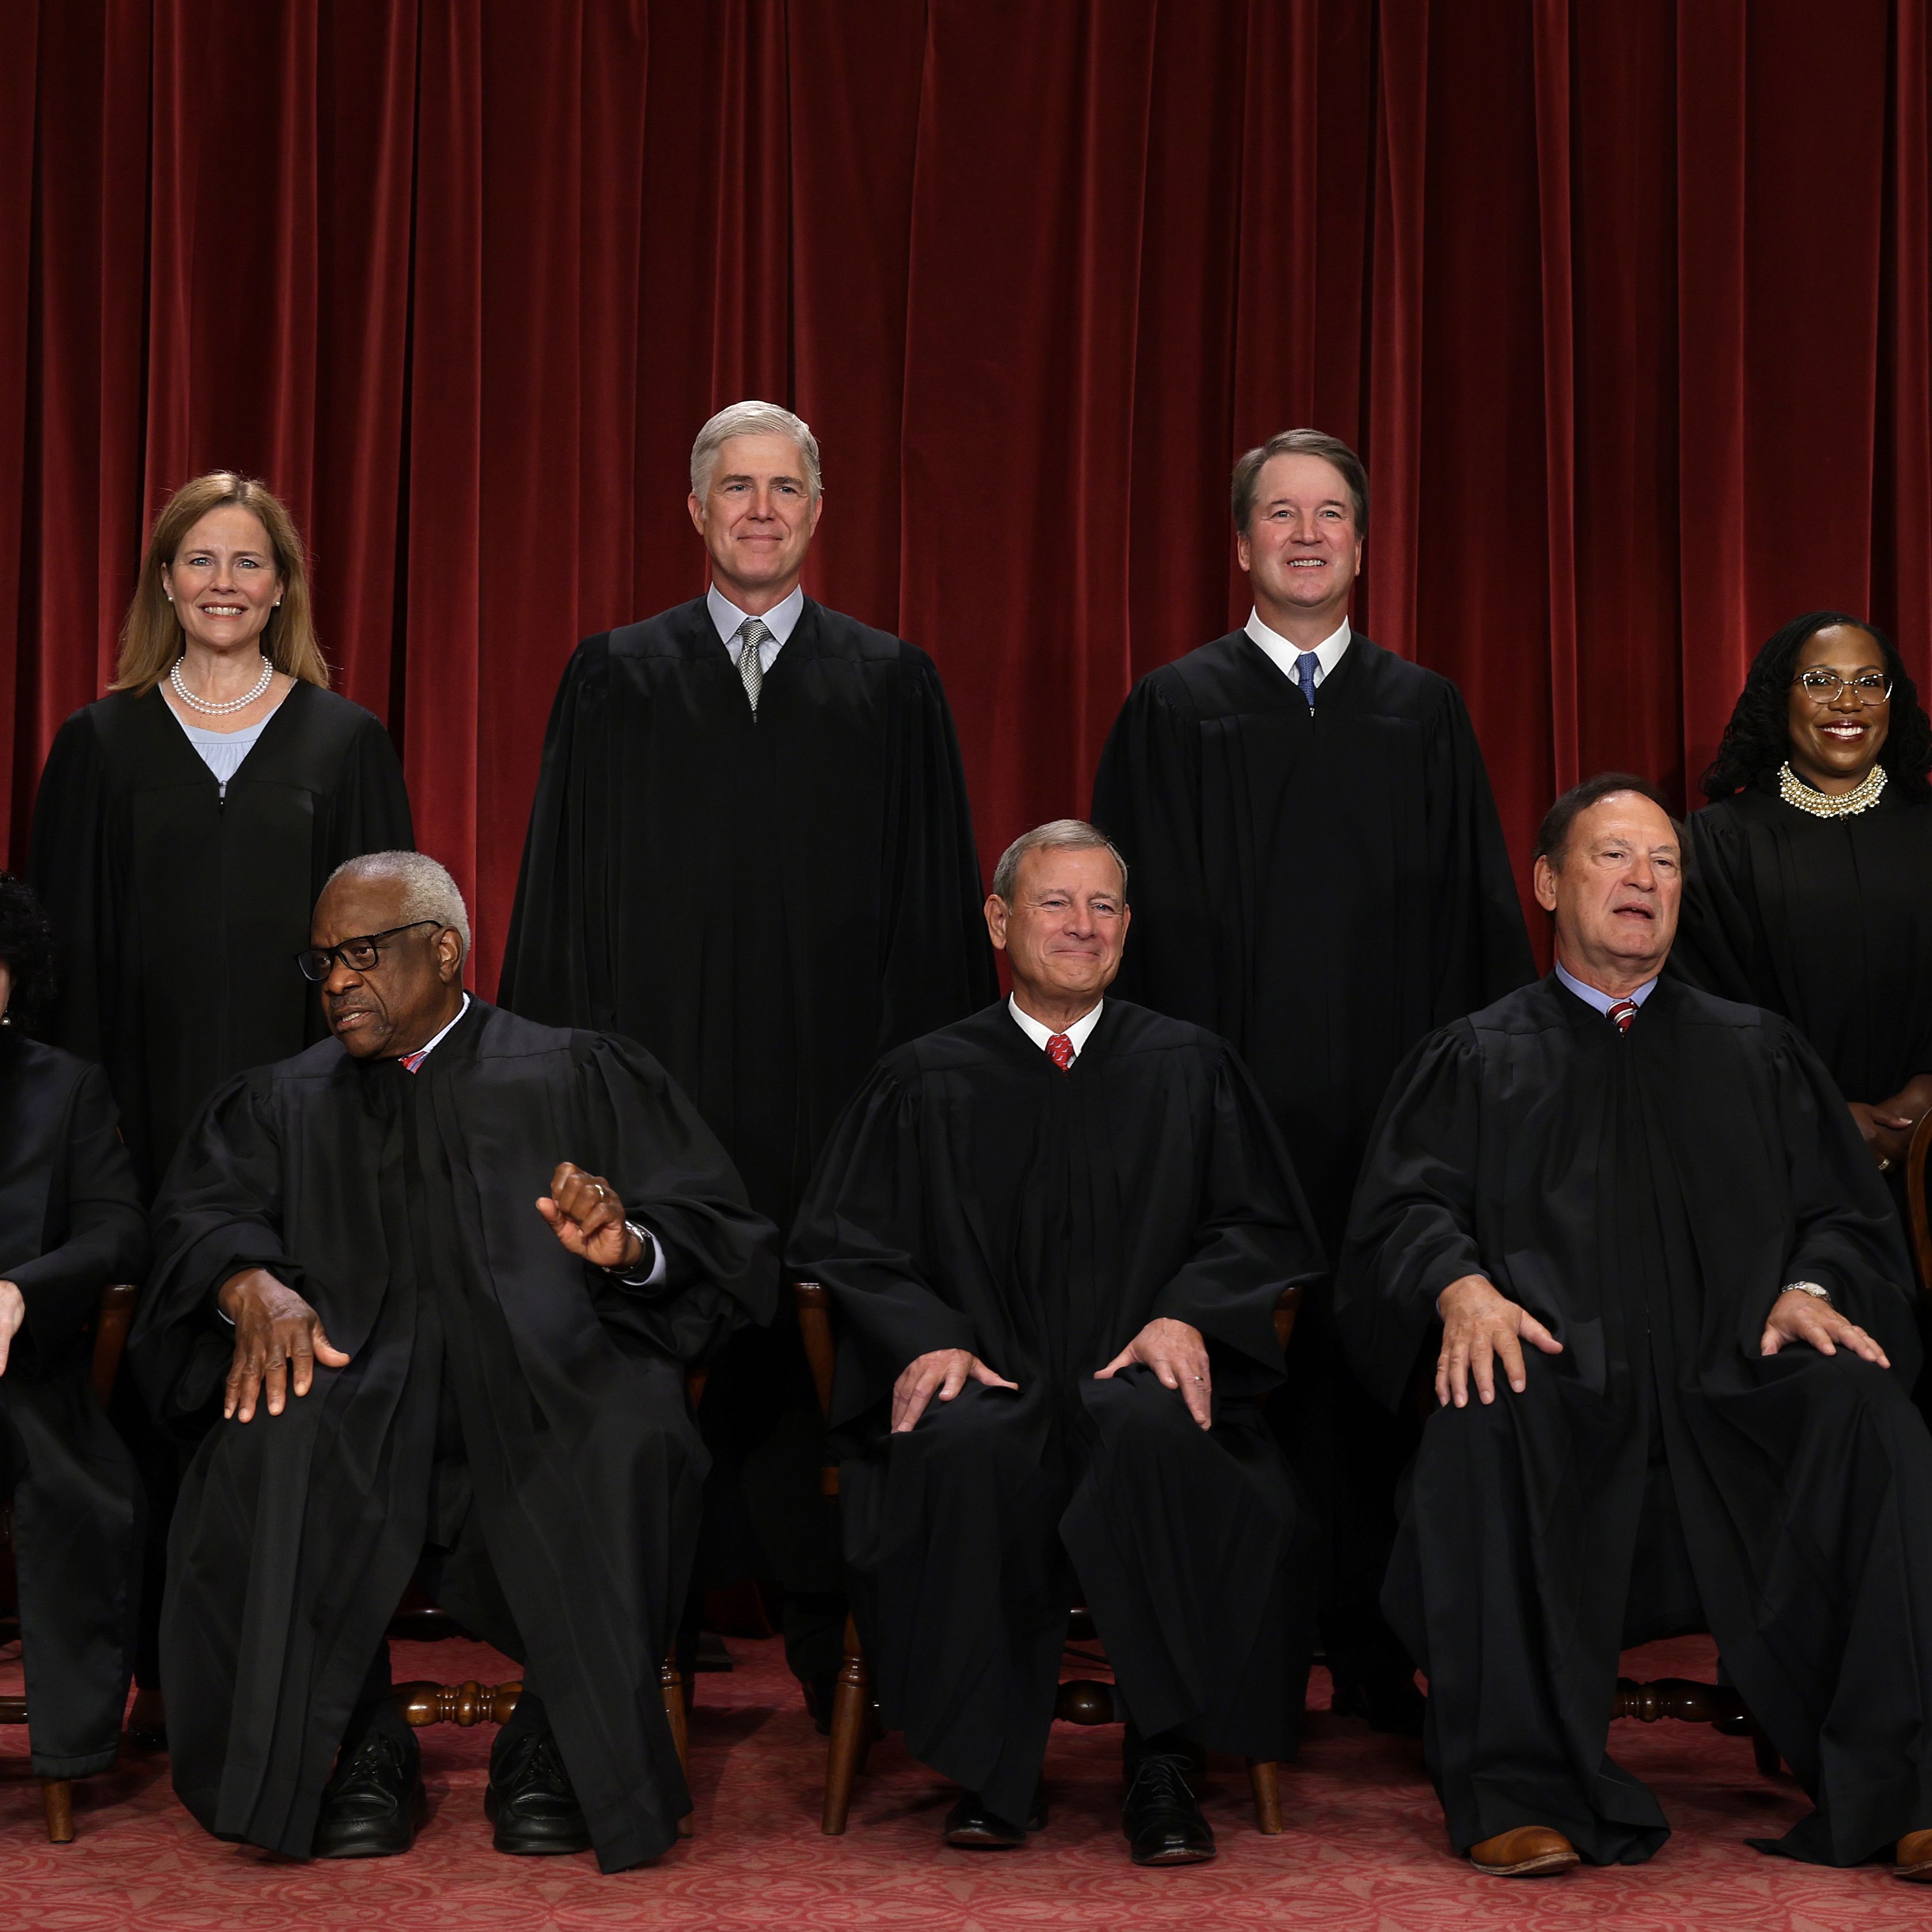 How to Carefully Manufacture a Supreme Court That Will Get YOU Results